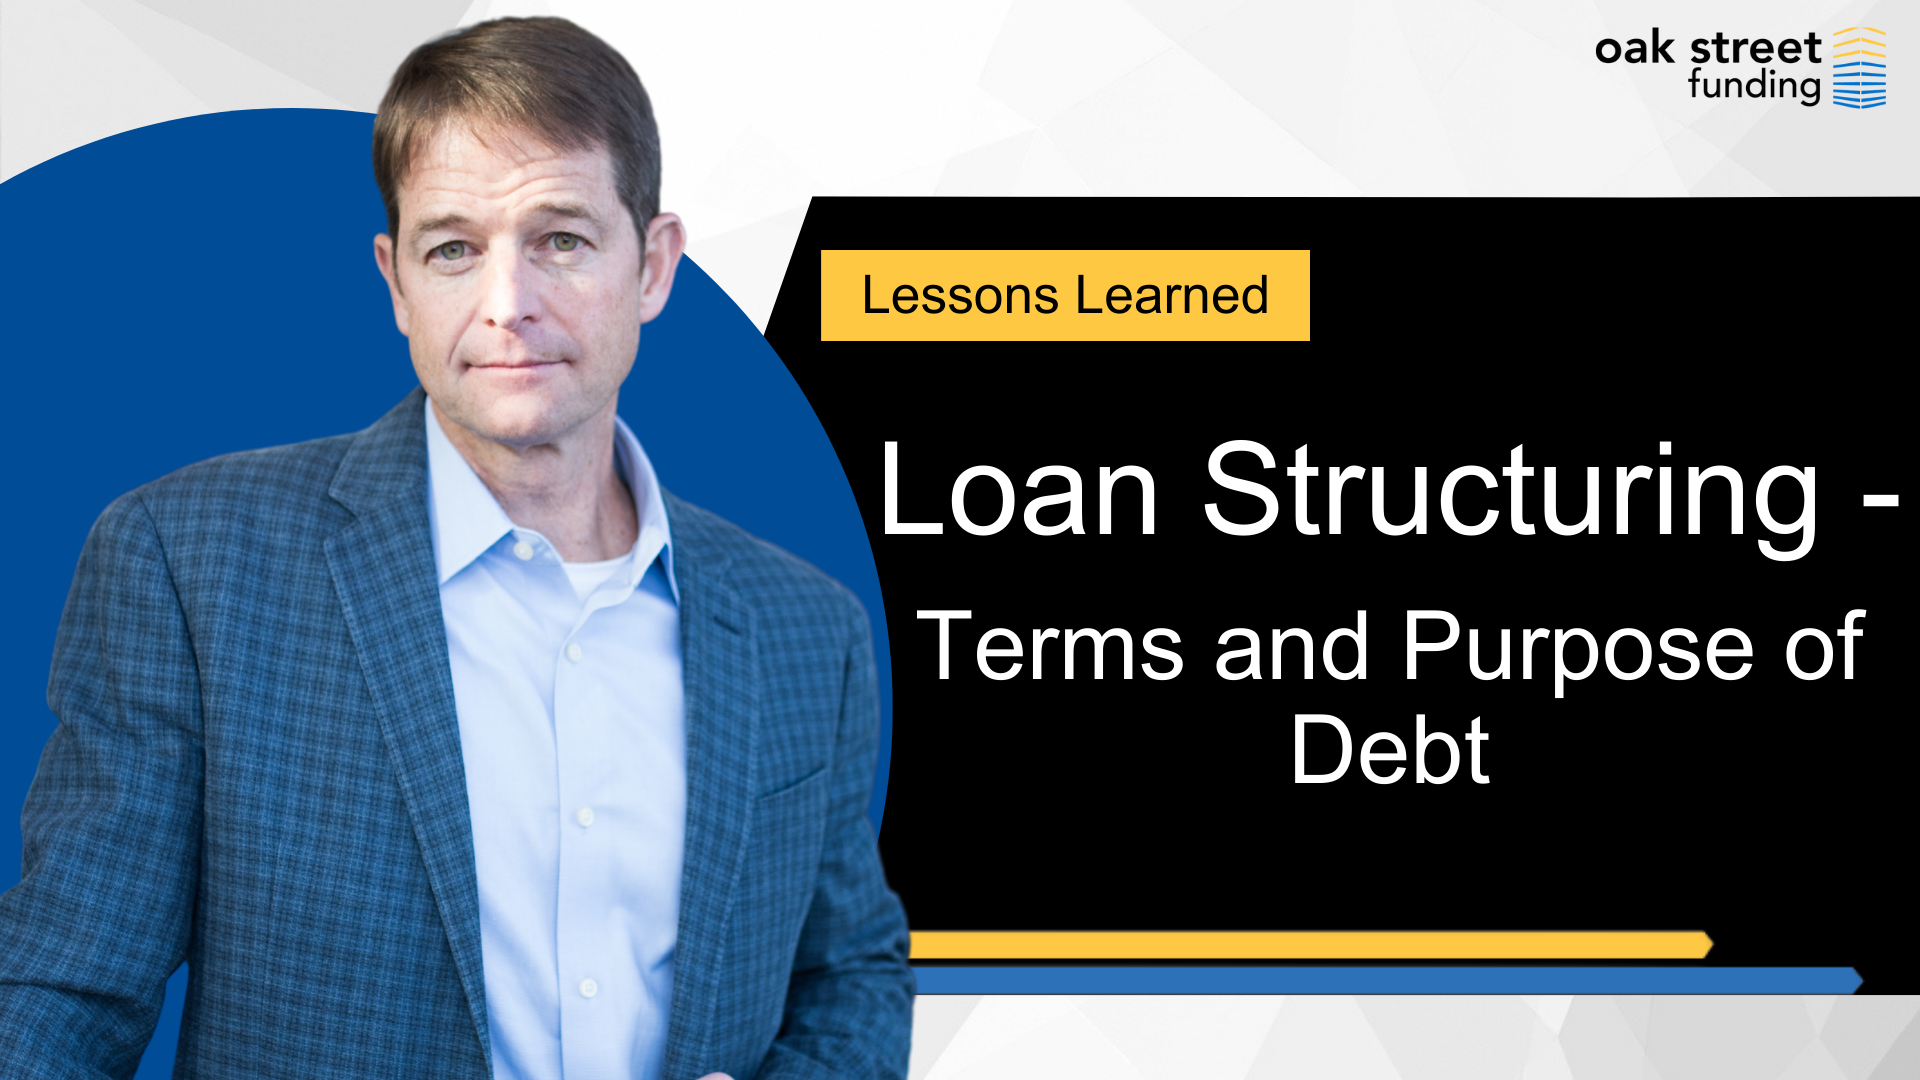 Lessons Learned: Loan Structuring - Terms and Purpose of Debt